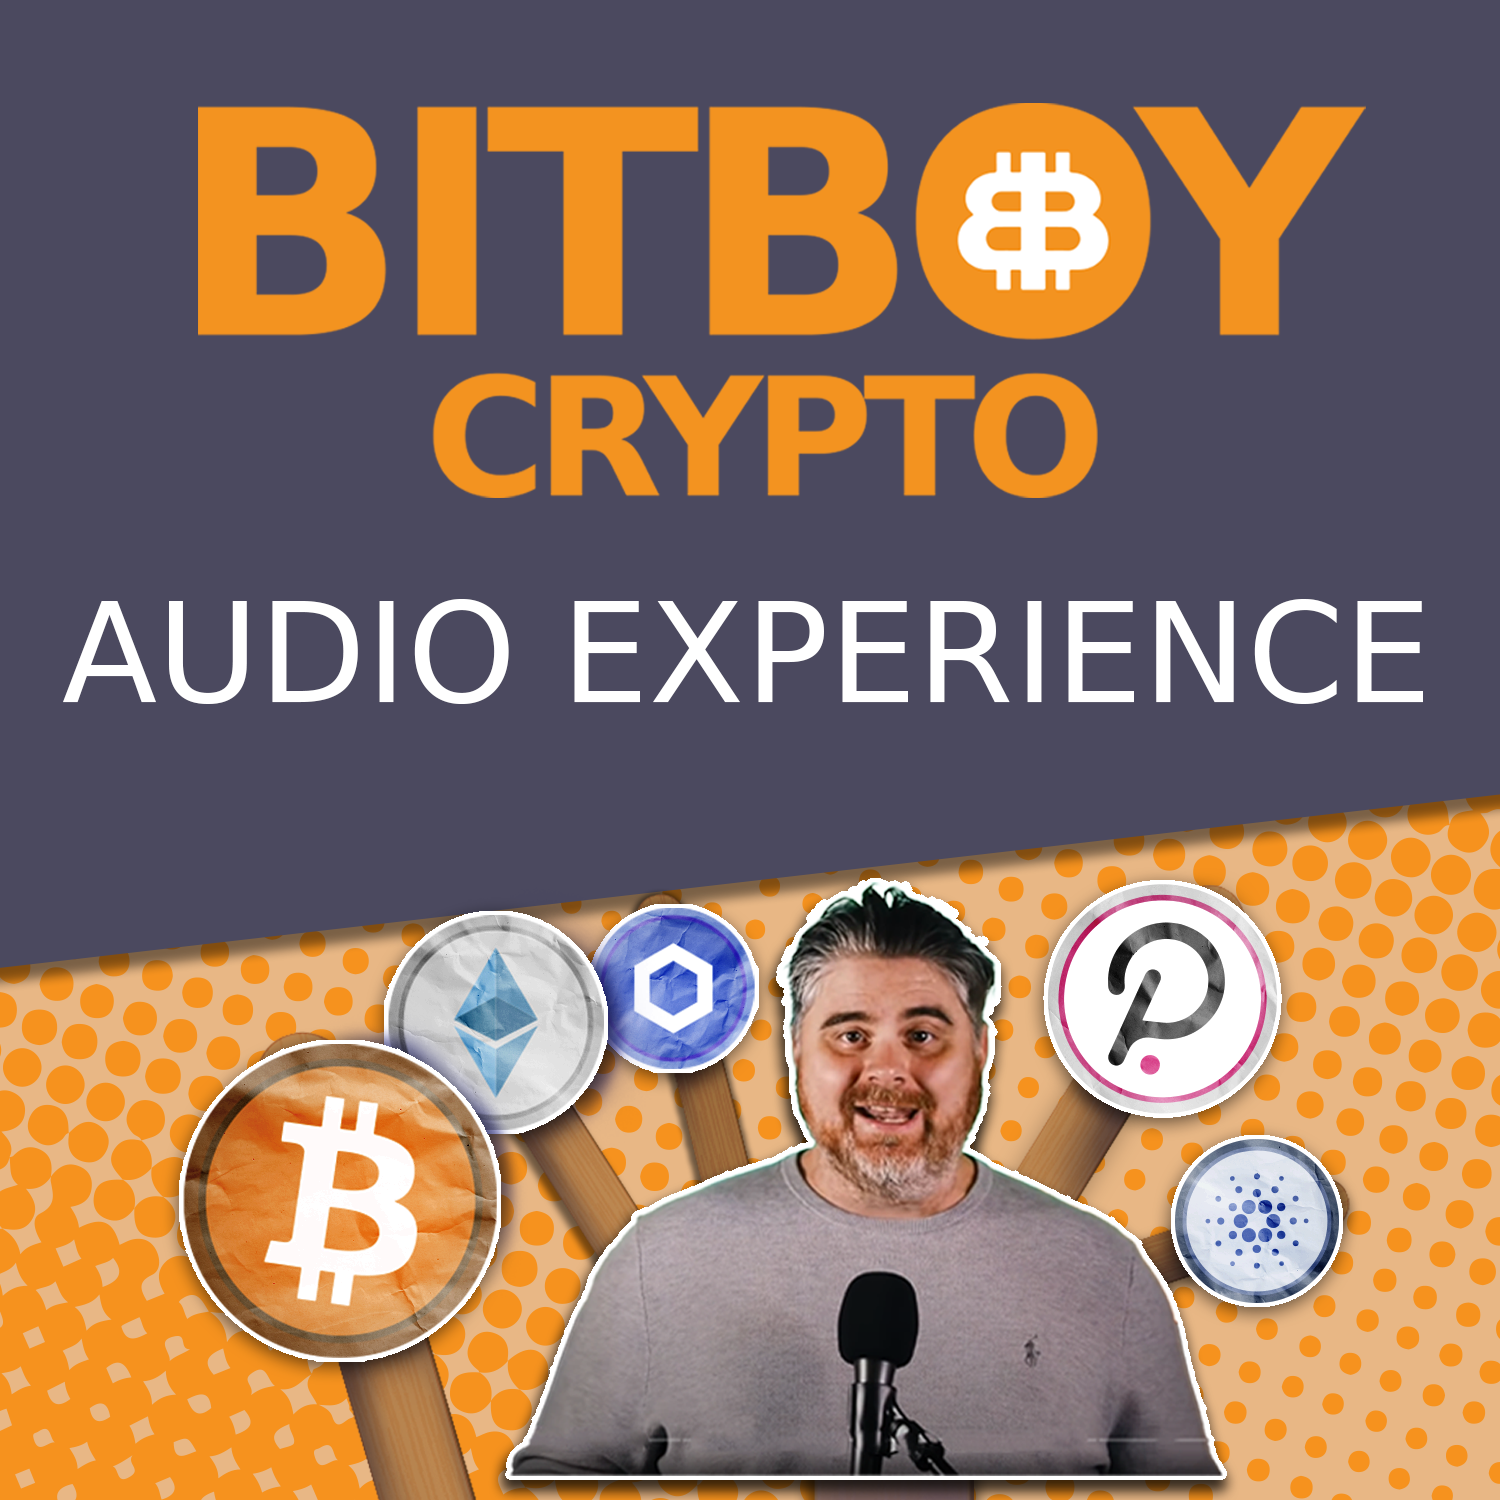 Fresh update on "three minutes" discussed on The Bitboy Crypto Podcast